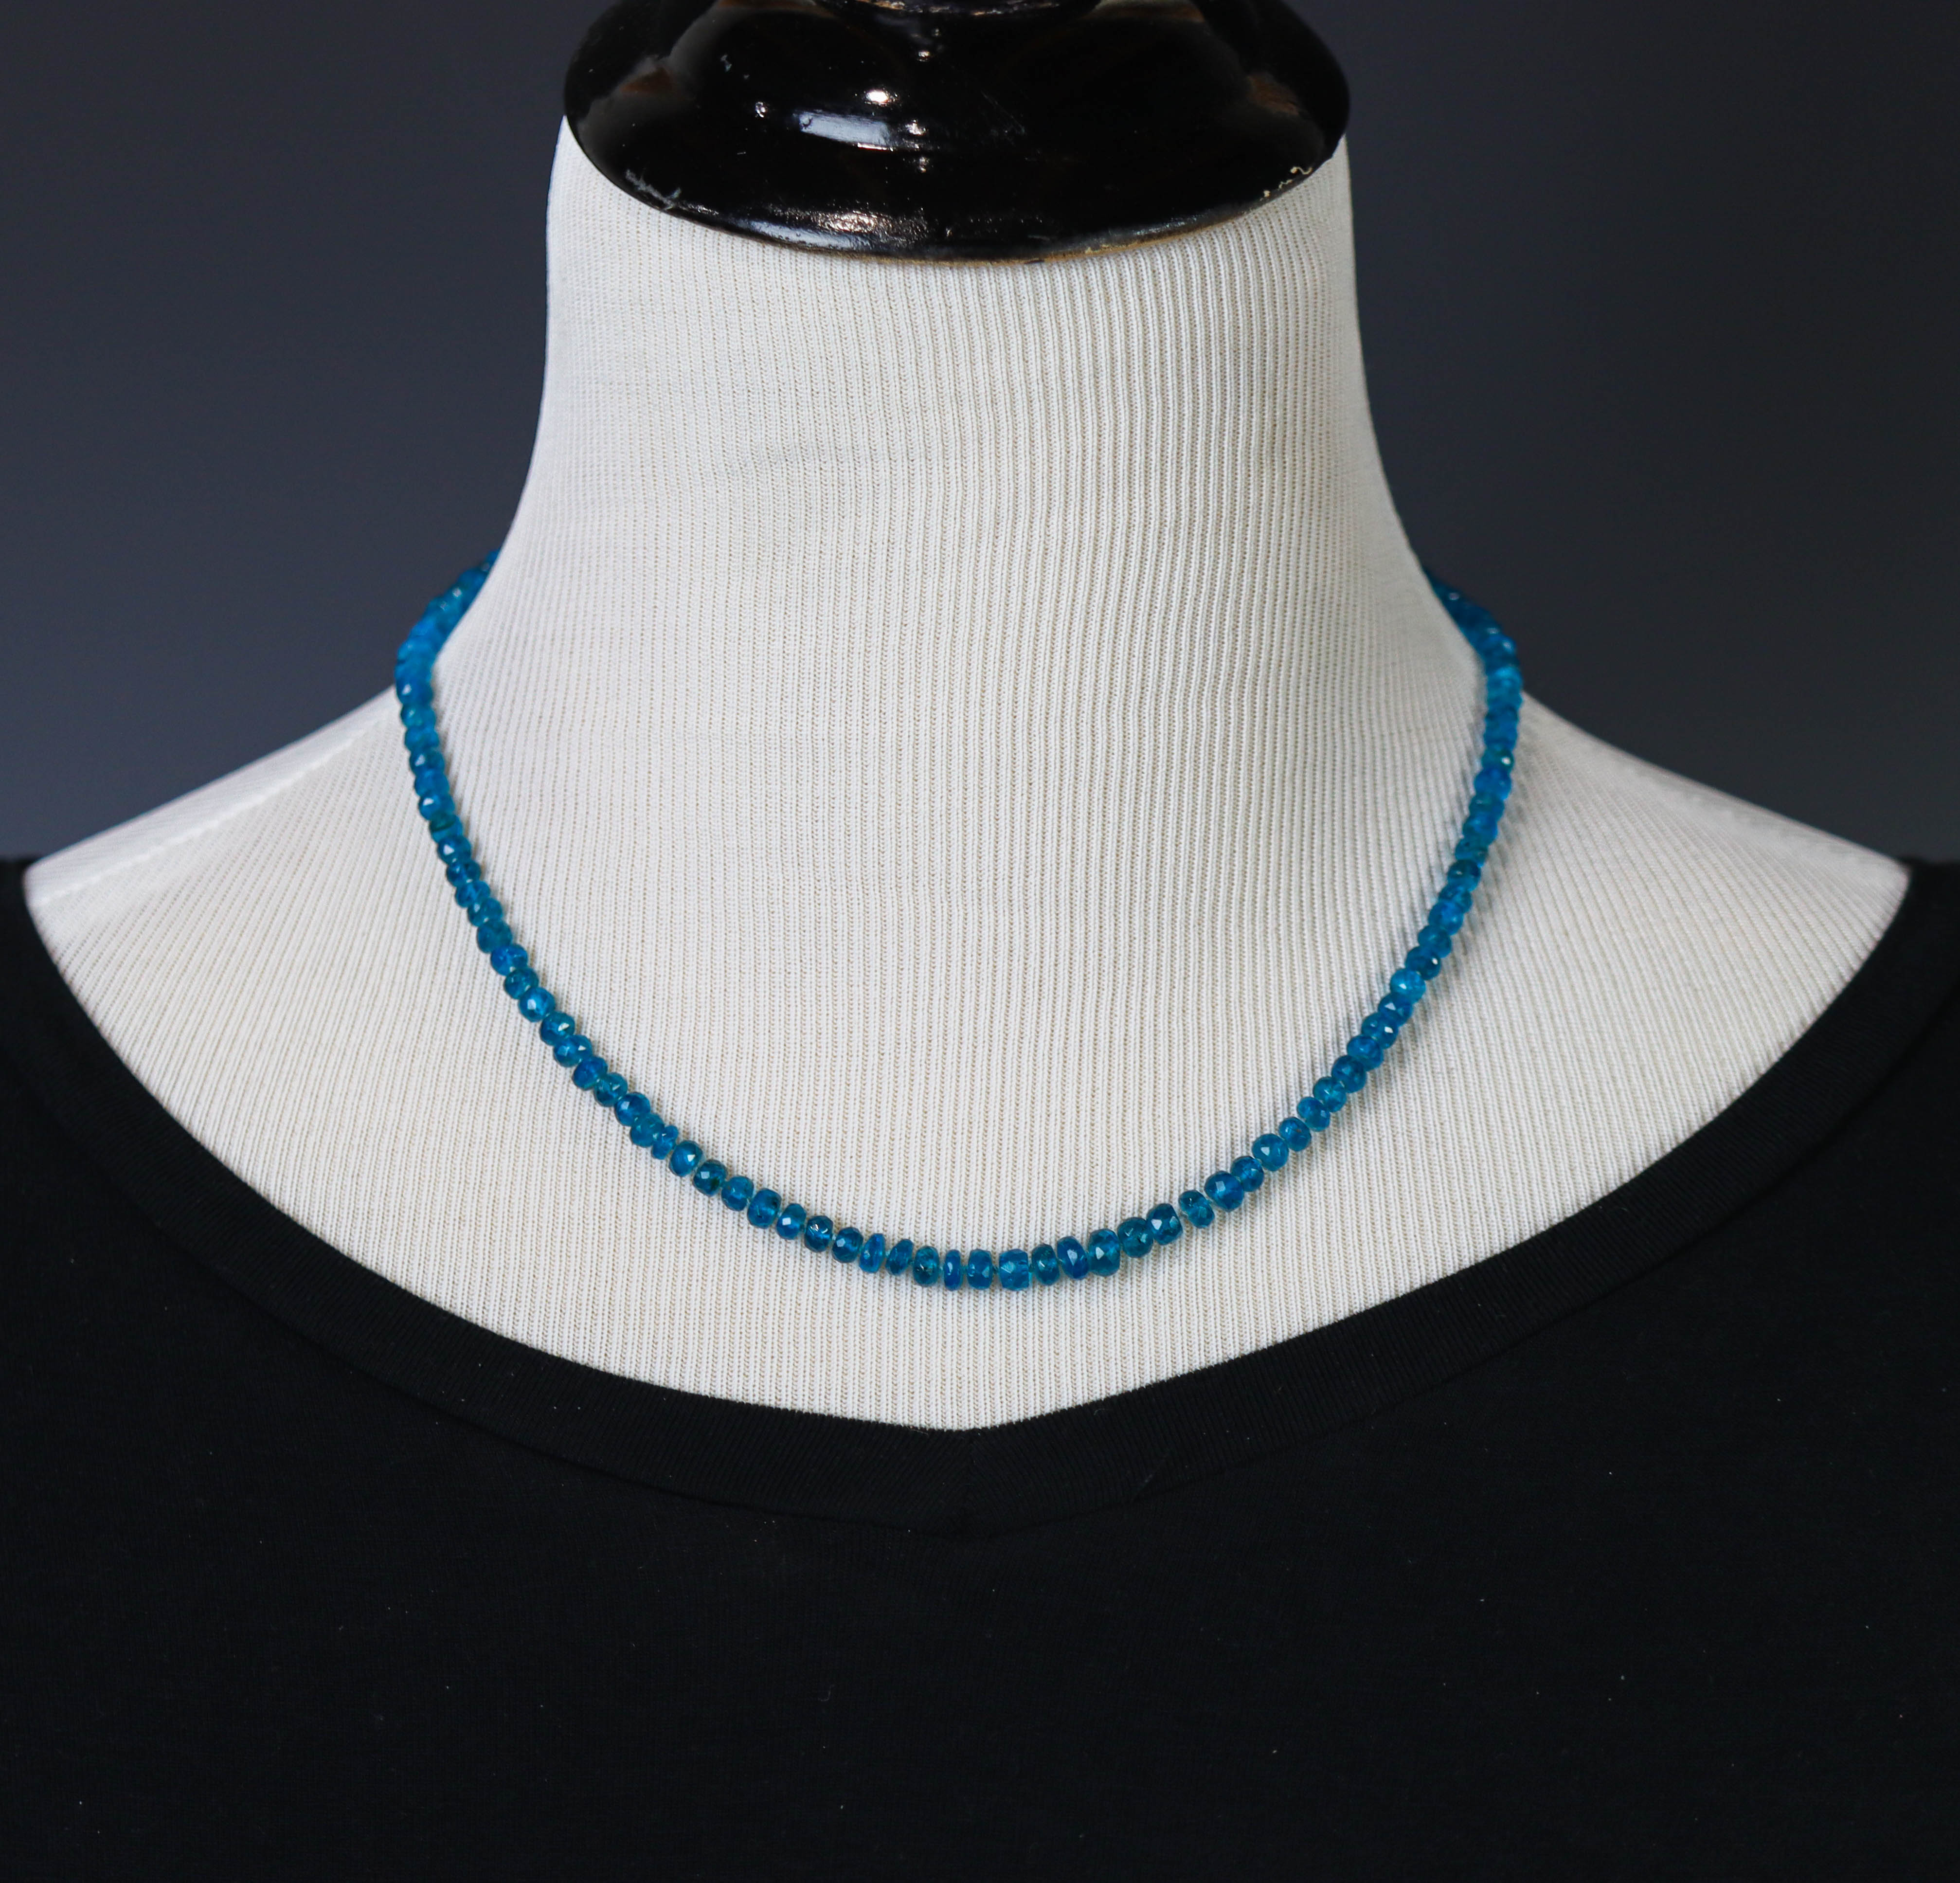 *LAST ONE* Neon Blue Apatite Hand Knotted Bead Necklace Sterling Silver